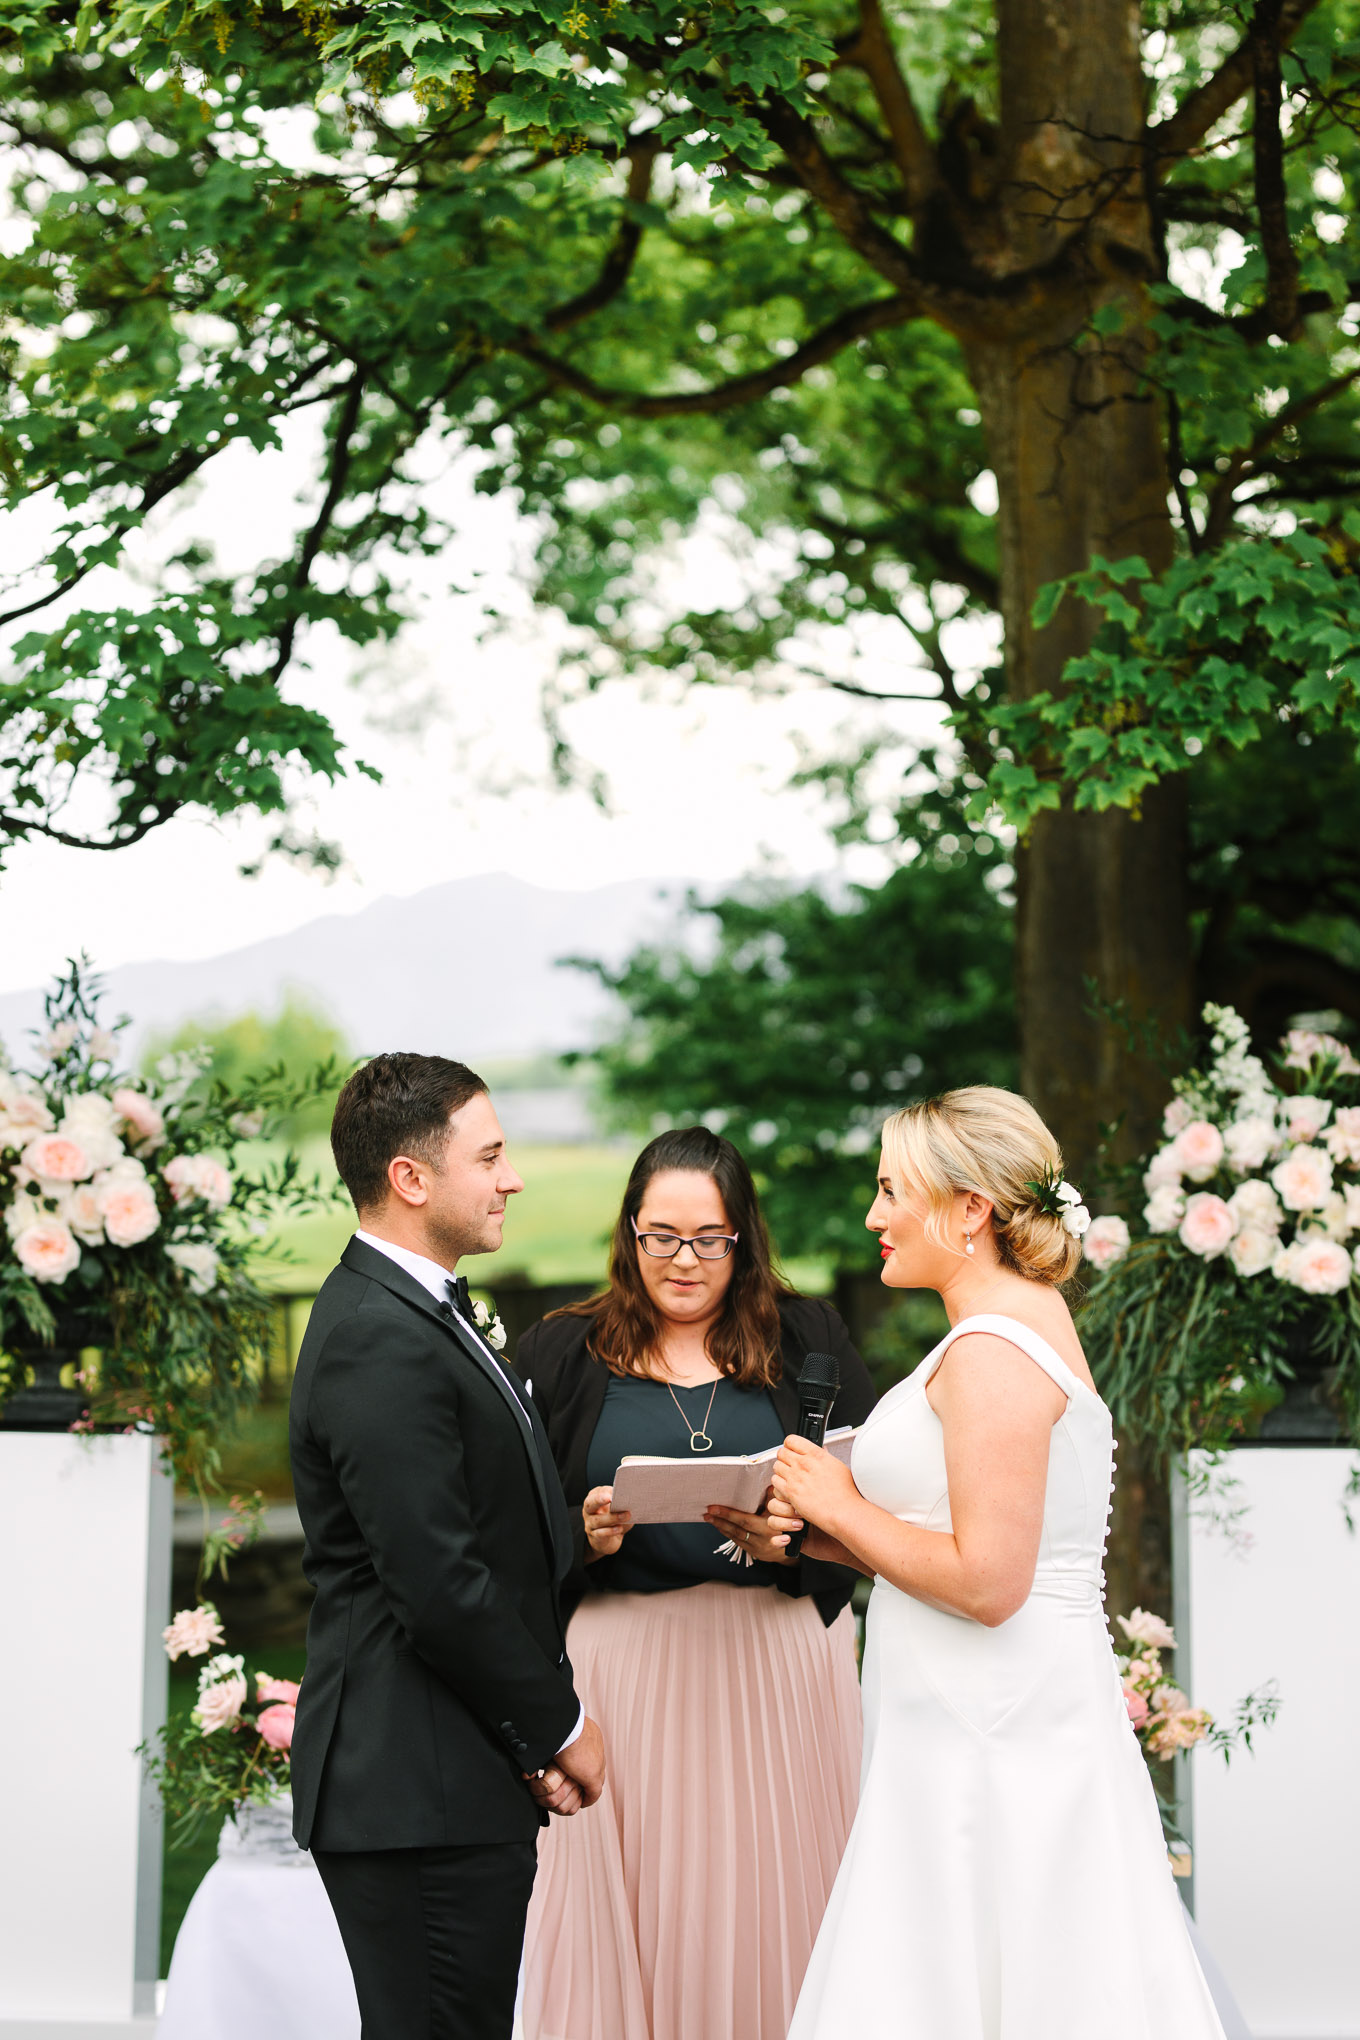 Bride and groom exchanging vows. Millbrook Resort Queenstown New Zealand wedding by Mary Costa Photography | www.marycostaweddings.com